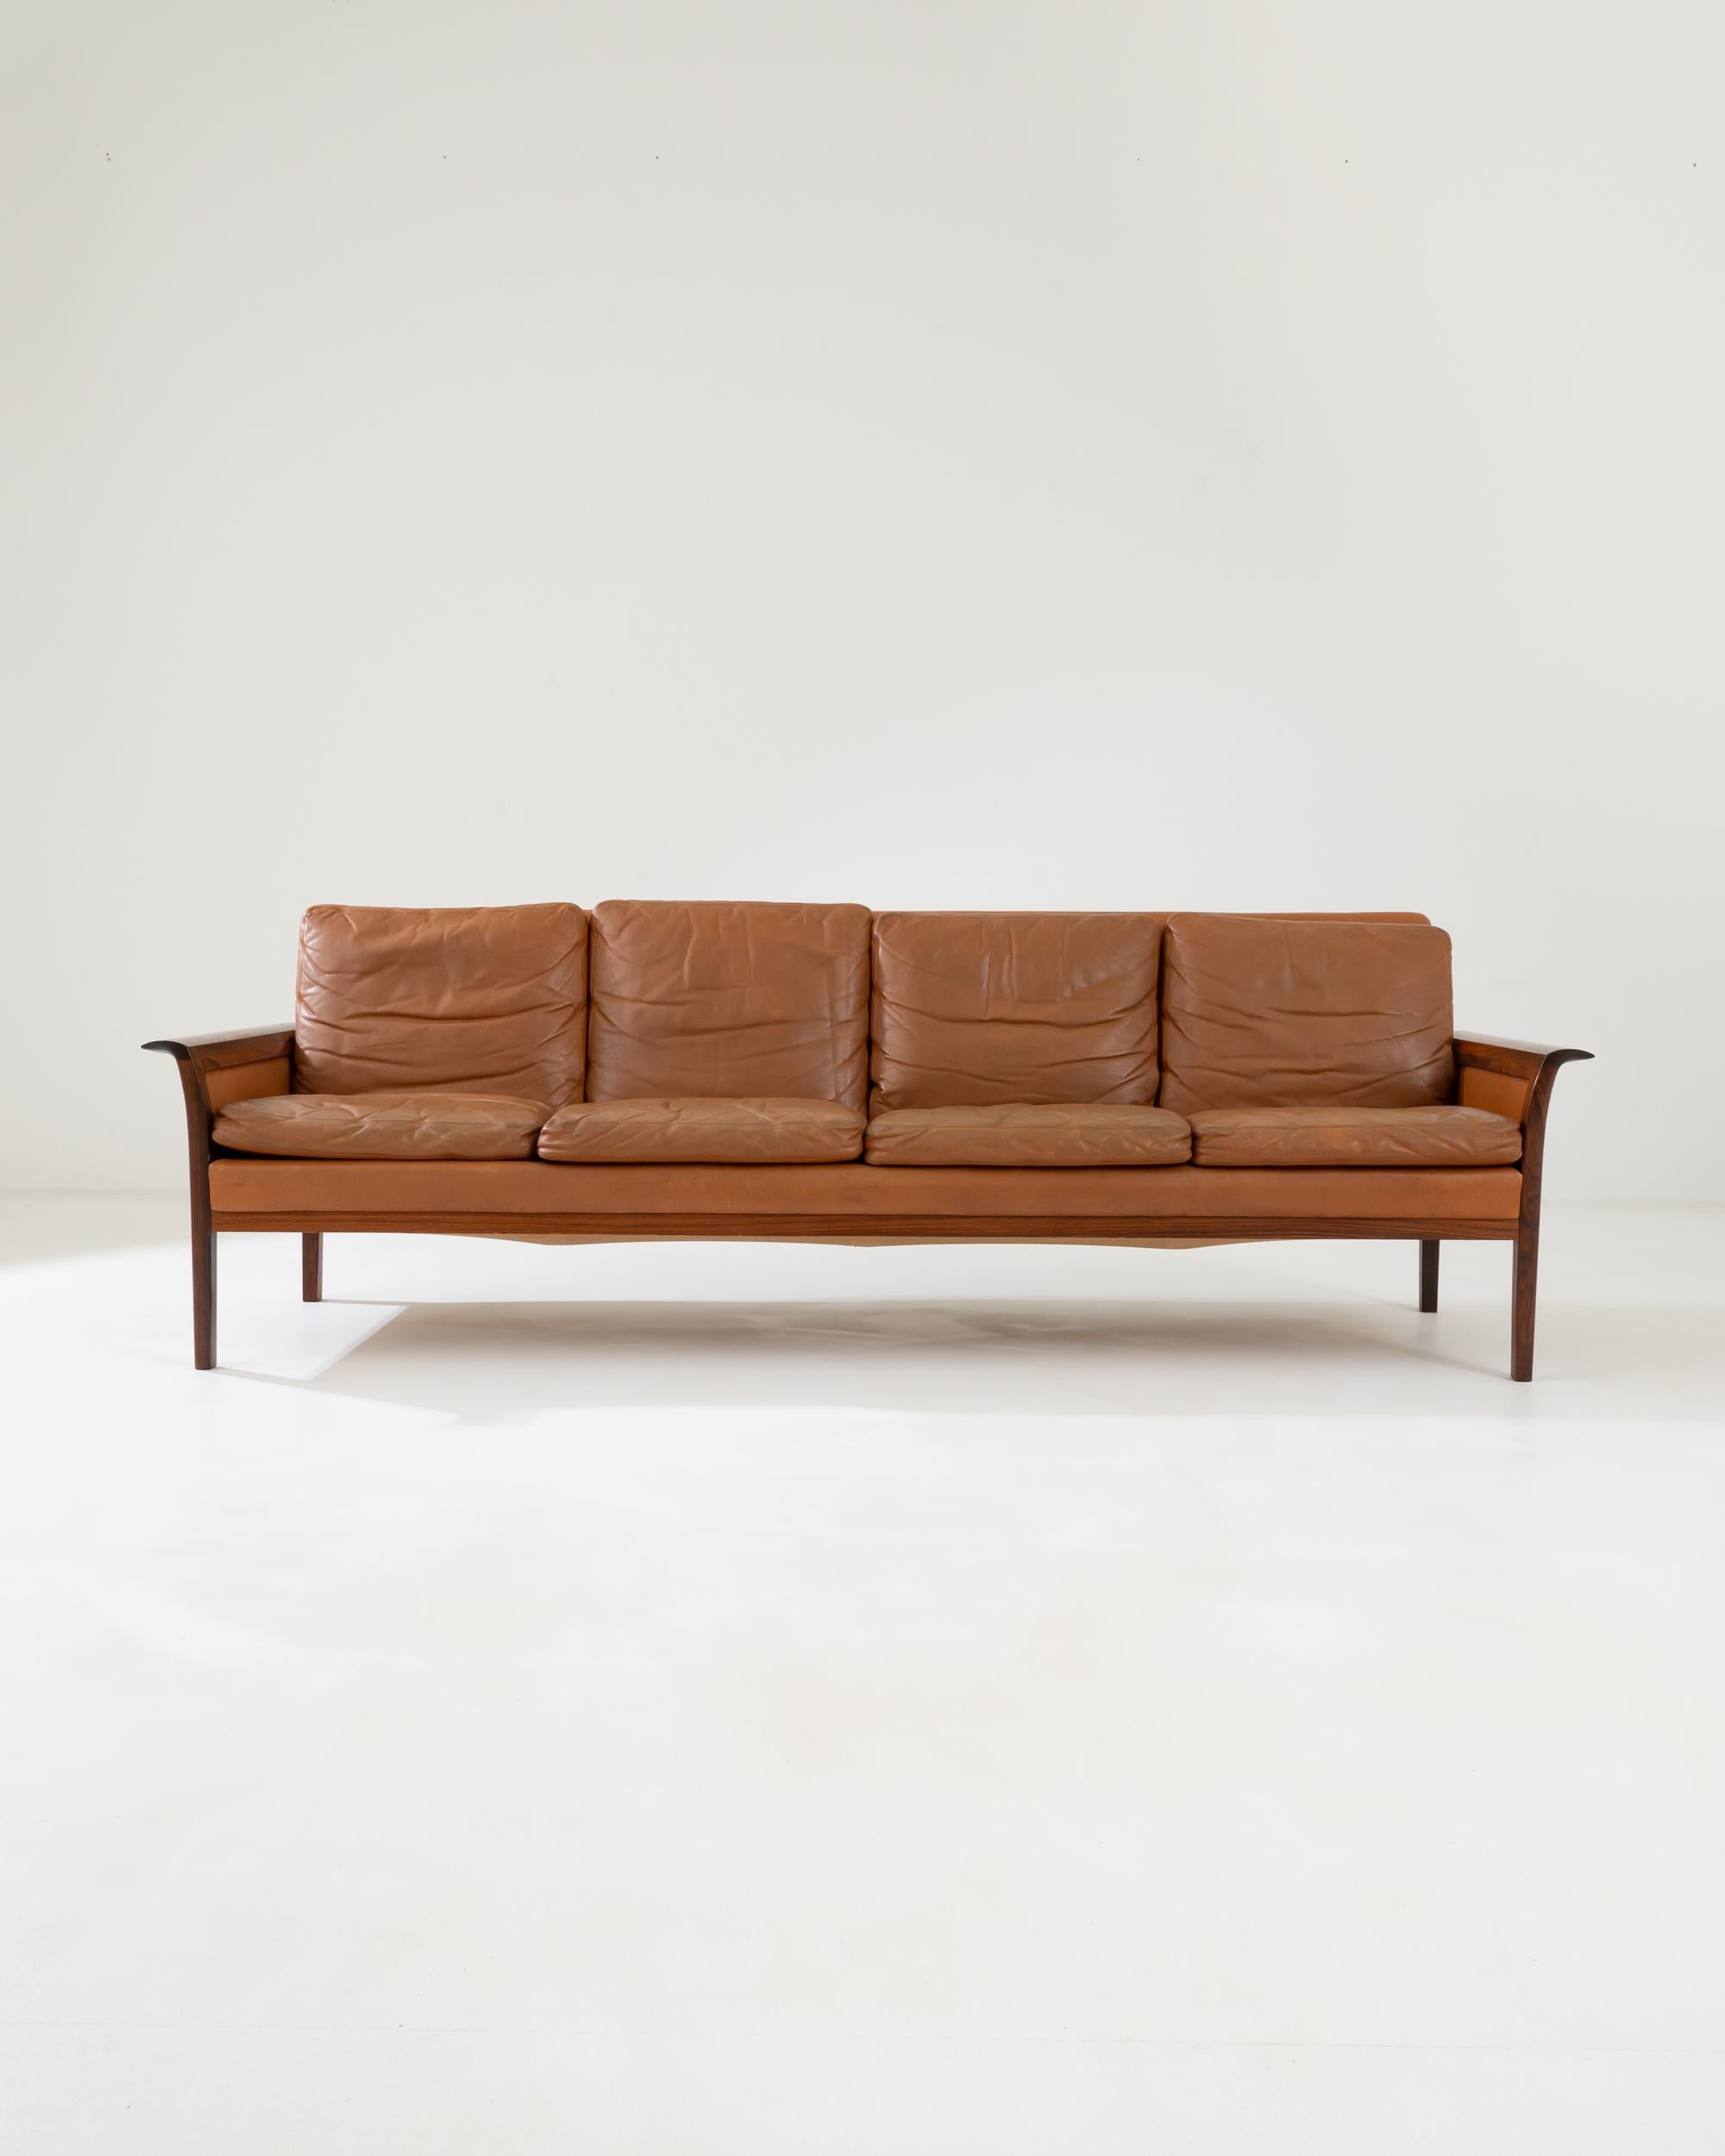 A four-seat leather sofa created in 1960s Denmark by Hans Olsen. This elegant, yet inviting sofa, stretches out, offering luscious seating space for four sitters. Created by experimental furniture designer, Hans Olsen, this particular sofa artfully